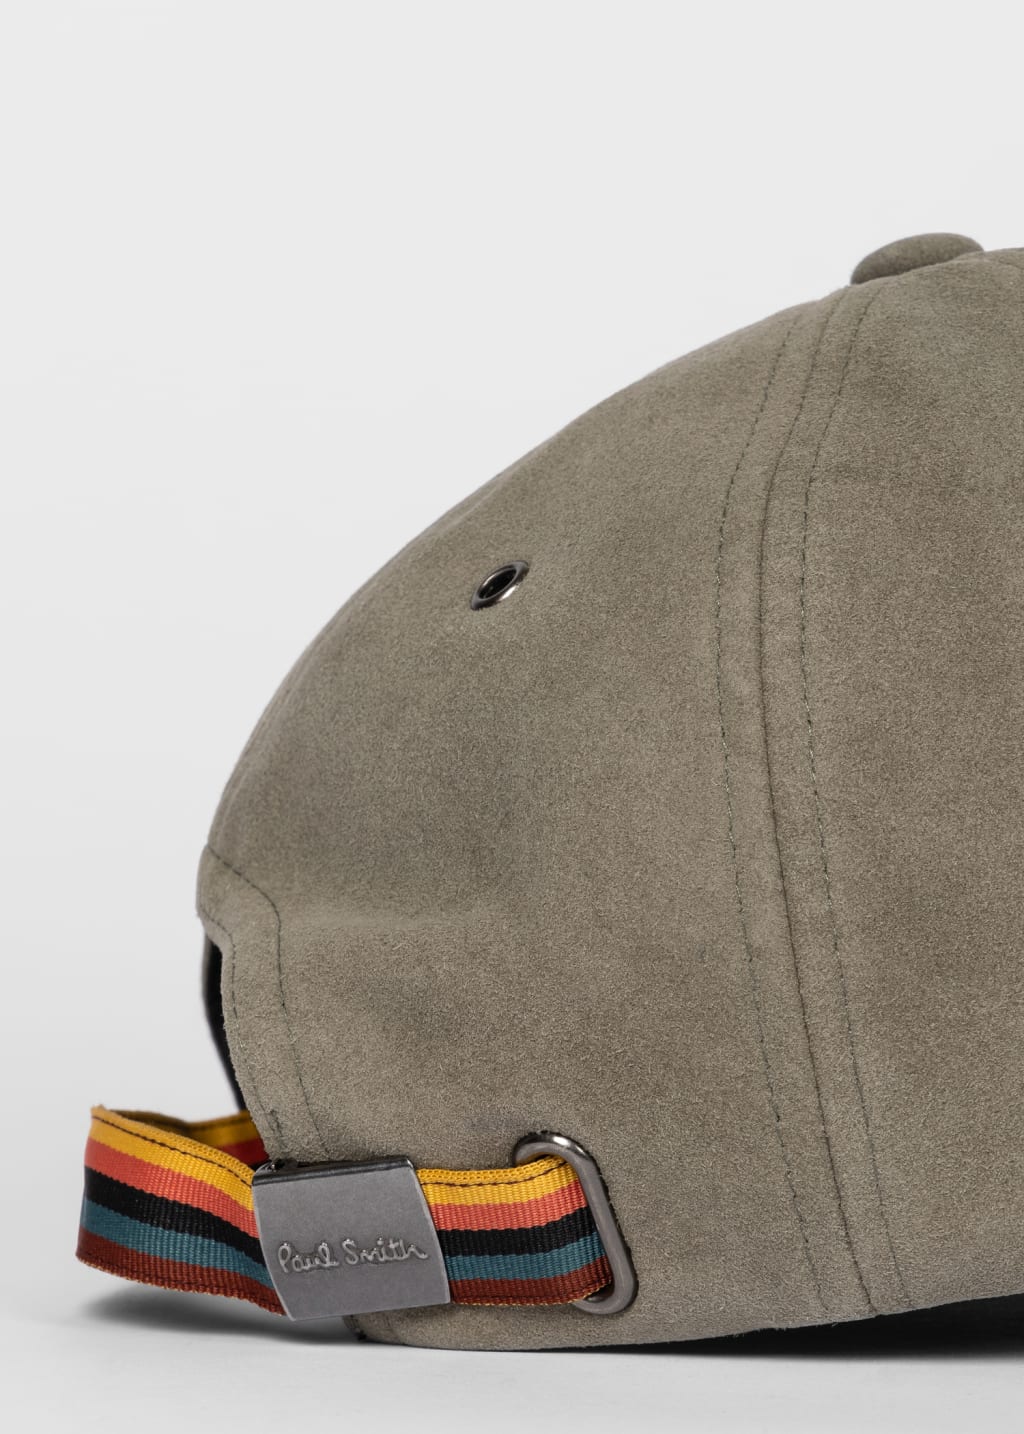 Detail View - Washed Khaki Suede Cap Paul Smith